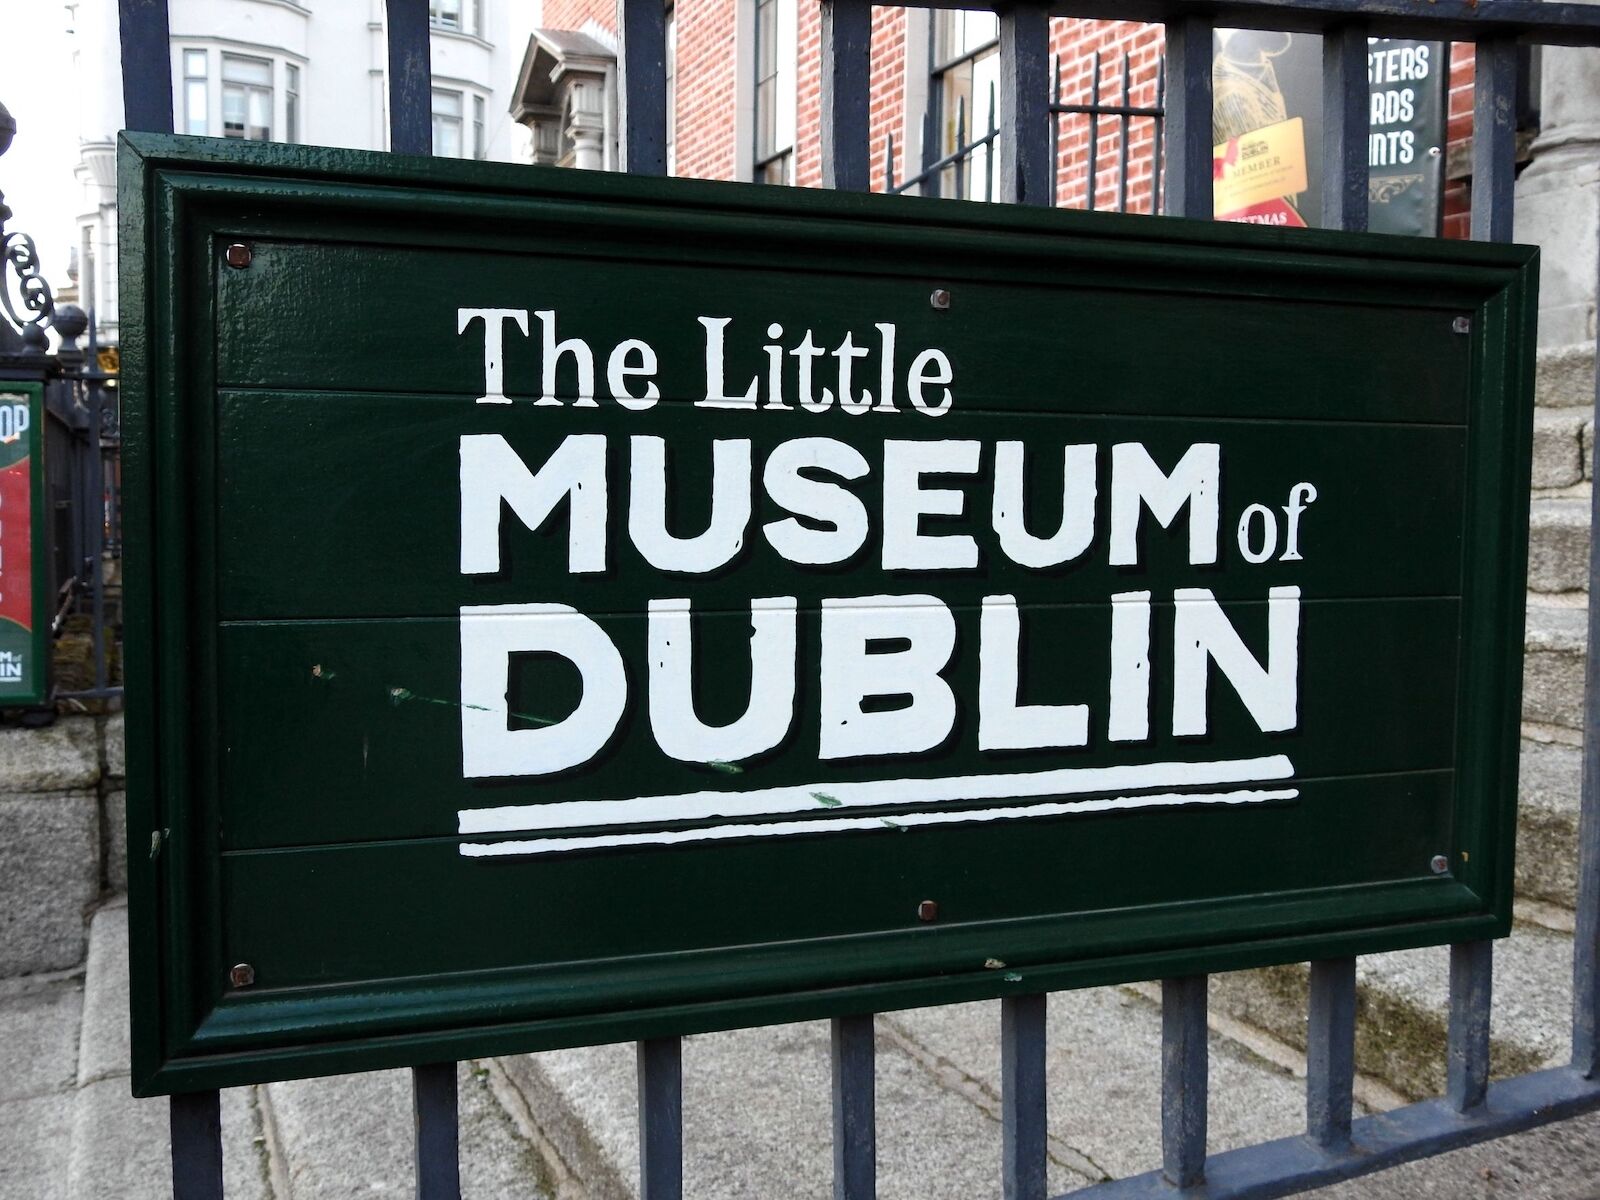 Museums in Dublin: Sign for the The Little Museums of Dublin